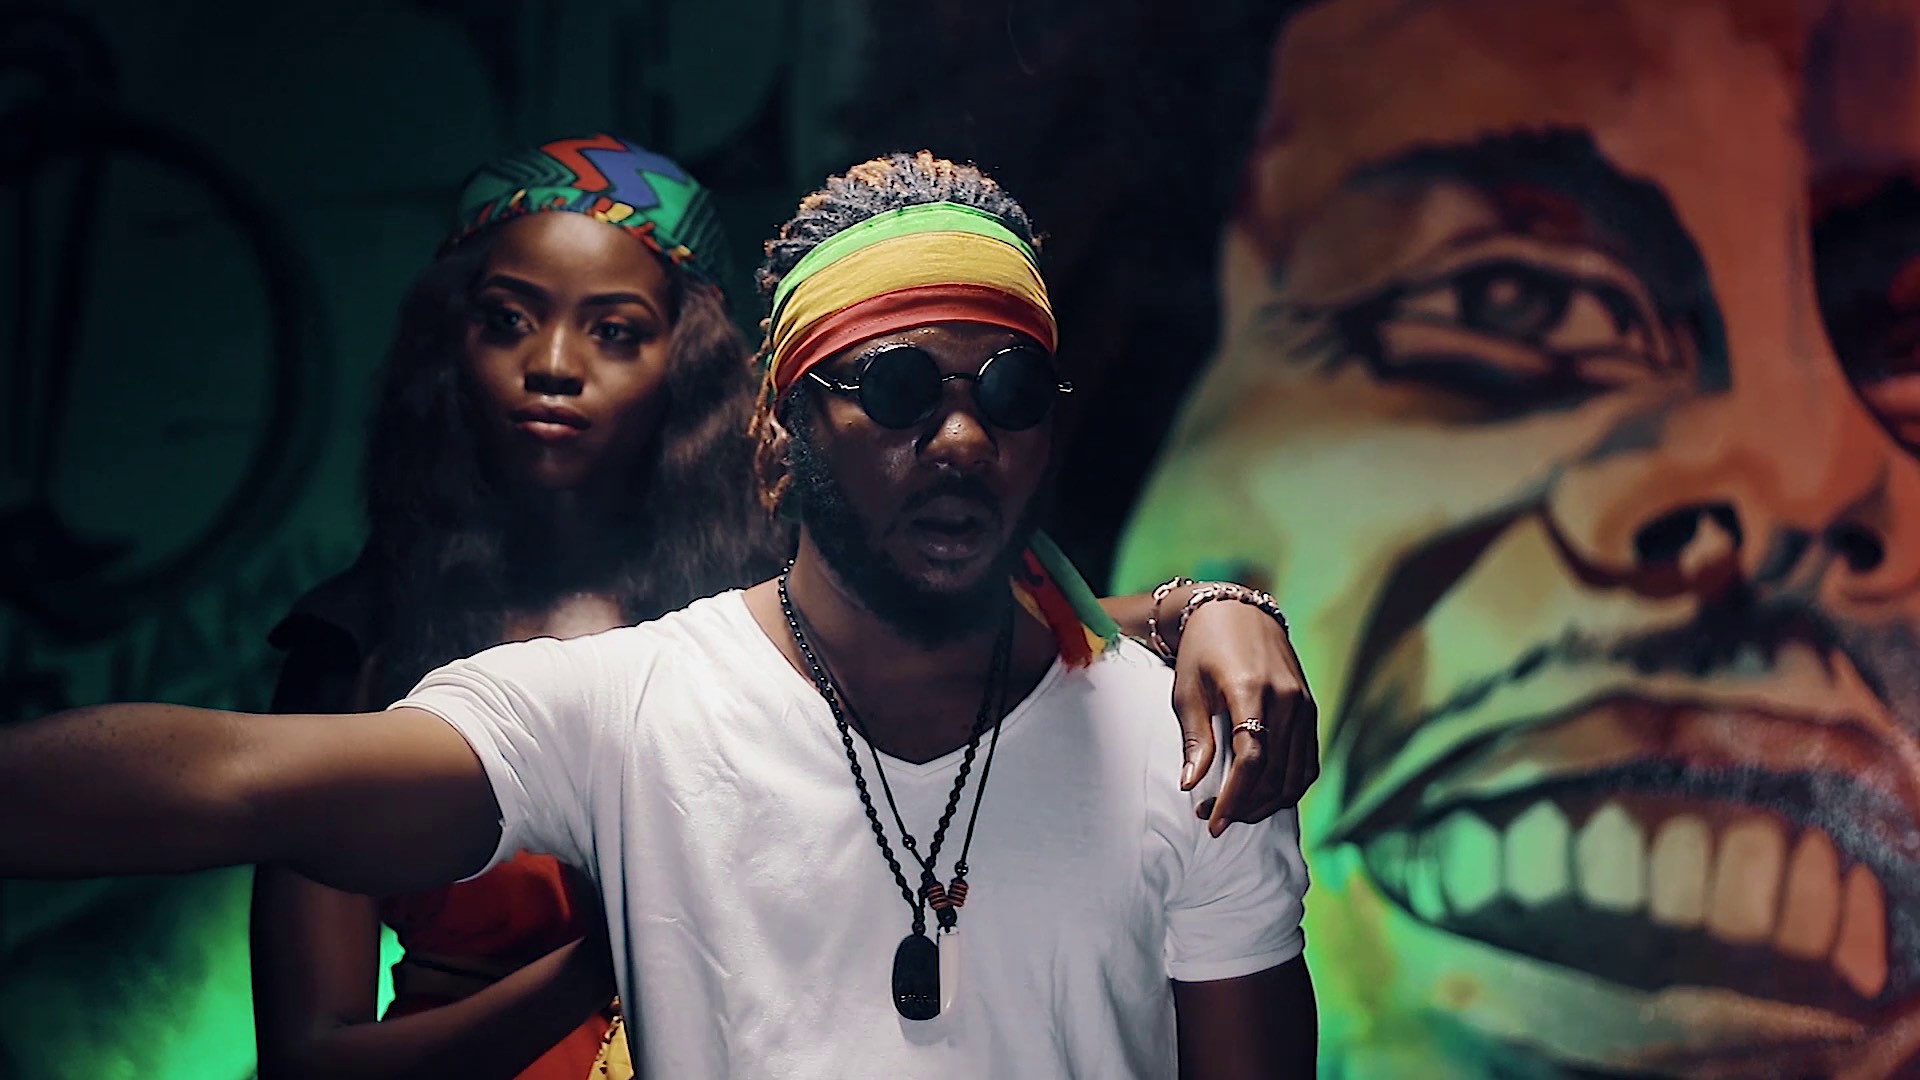 VIDEO: TheLionKing ft. Teddy Banty – Silencer